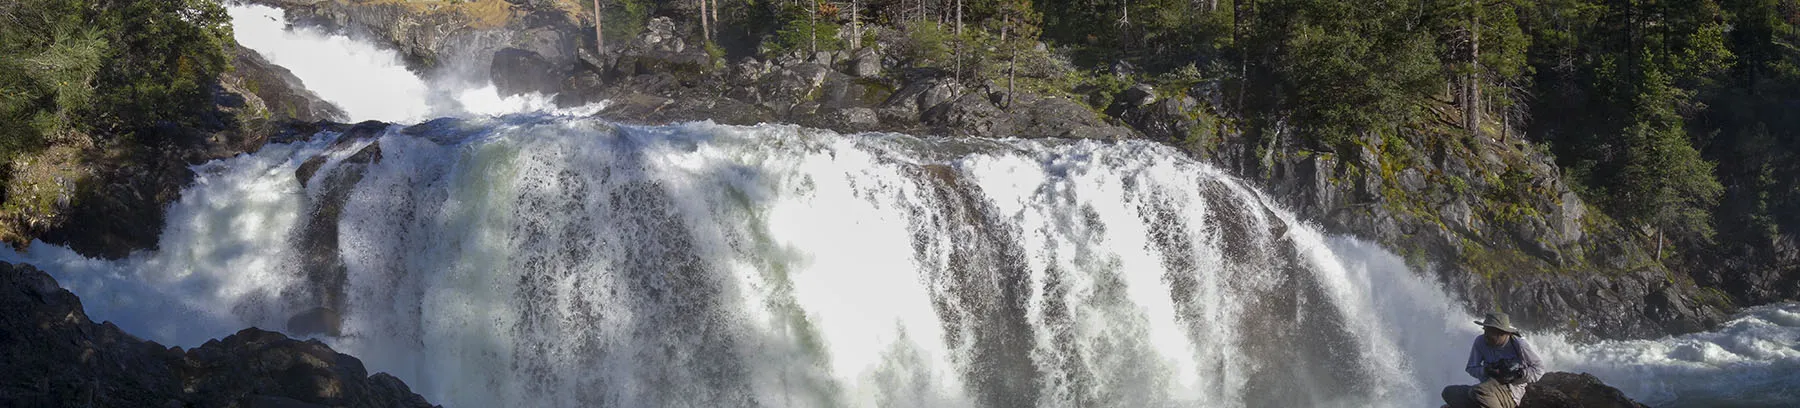 Panorama of Rancheria Falls with your truly in the foreground, trying in vain to shield the camera from the spray